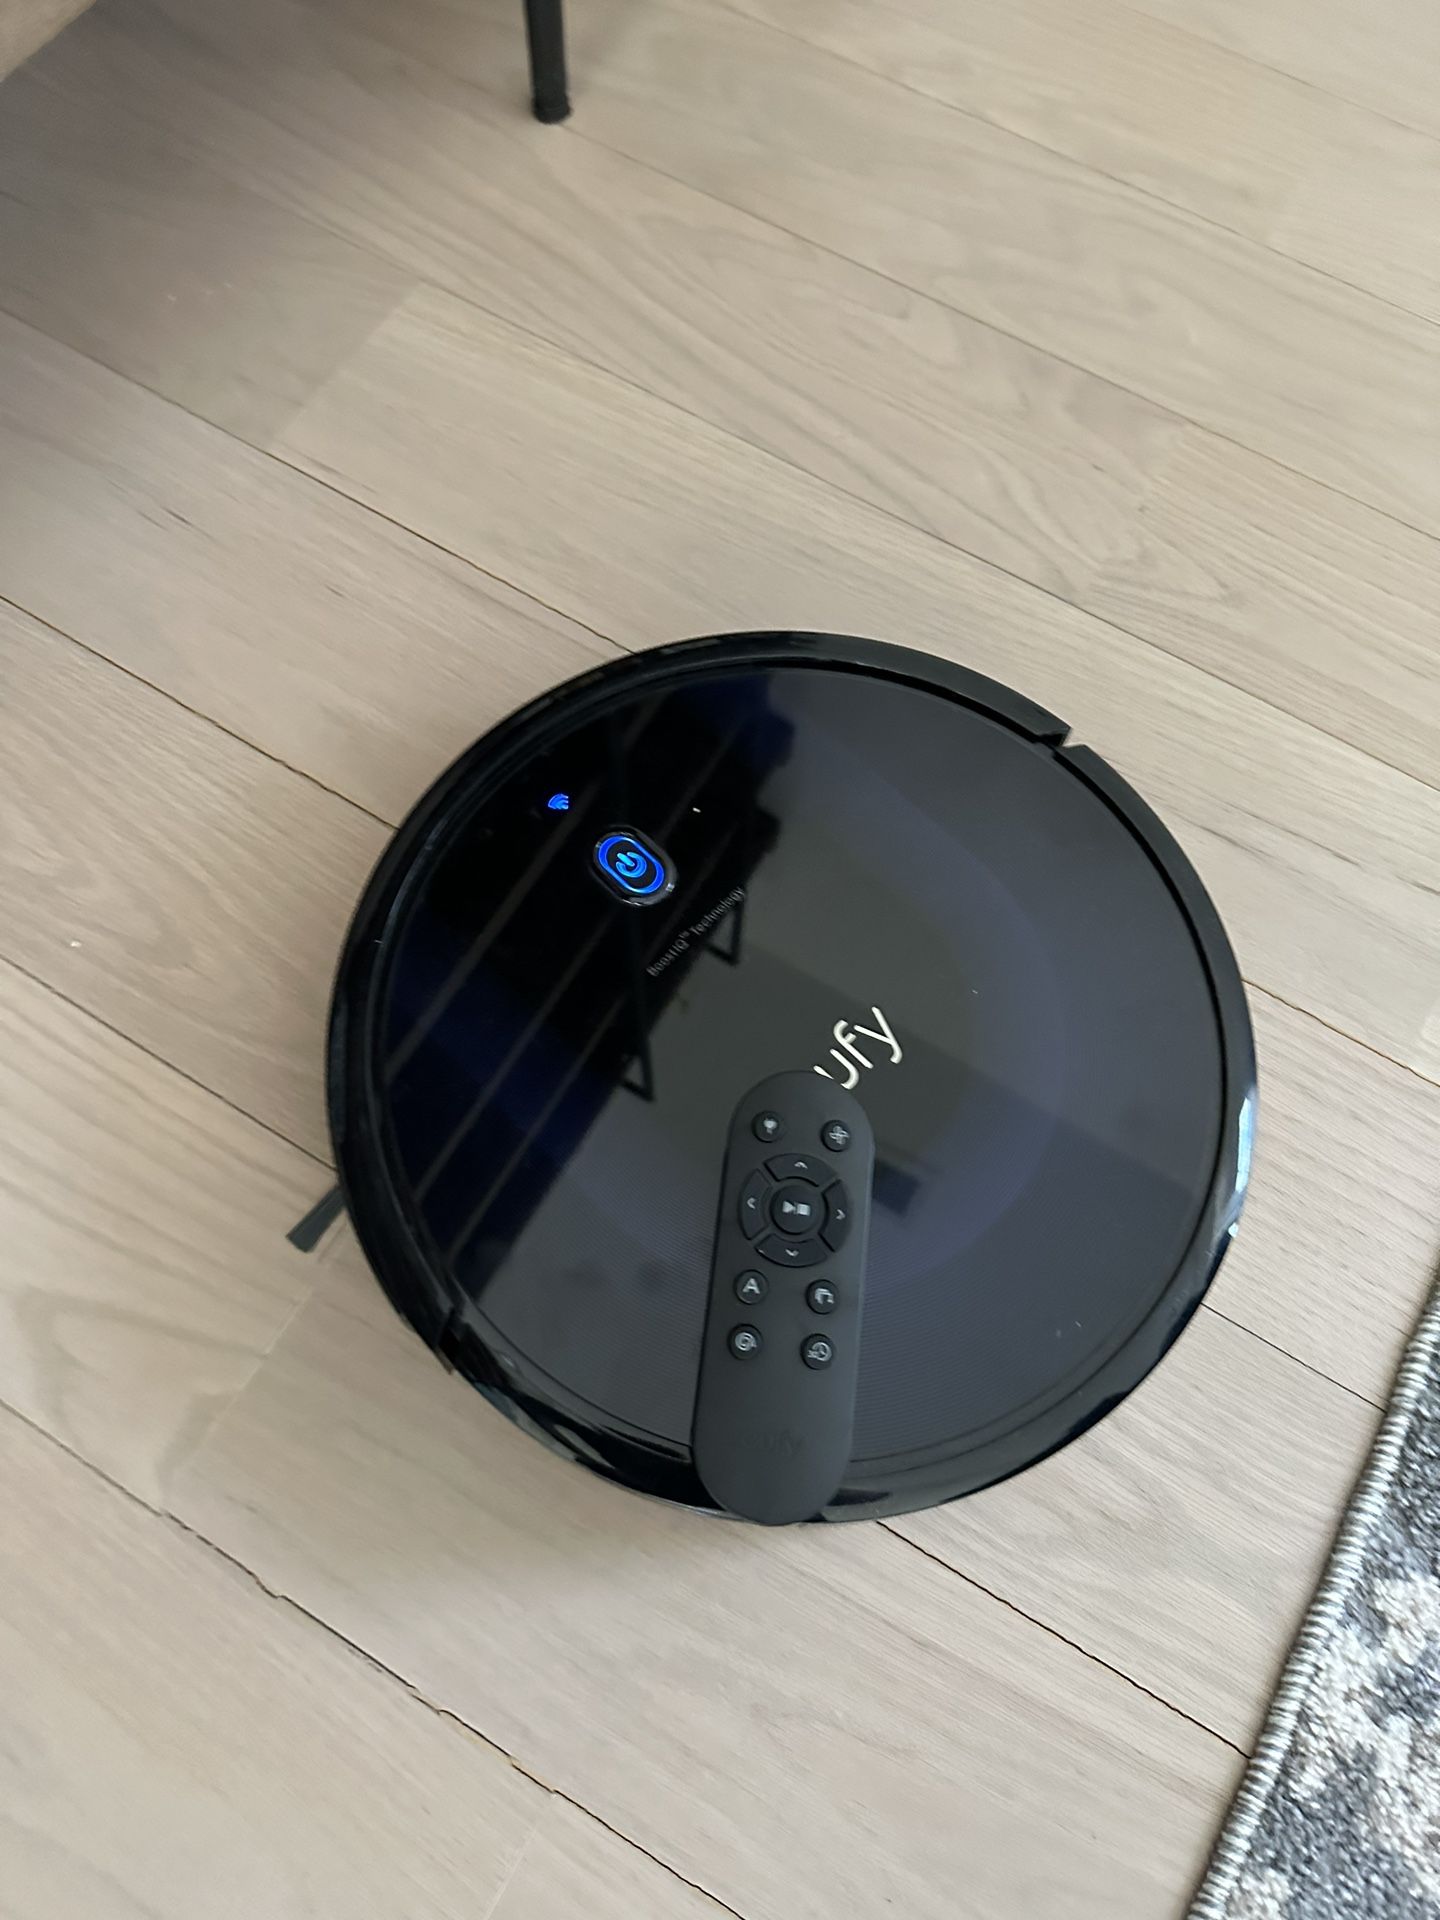 Title: Sleek Black Robotic Vacuum Cleaner with Dock and Remote 